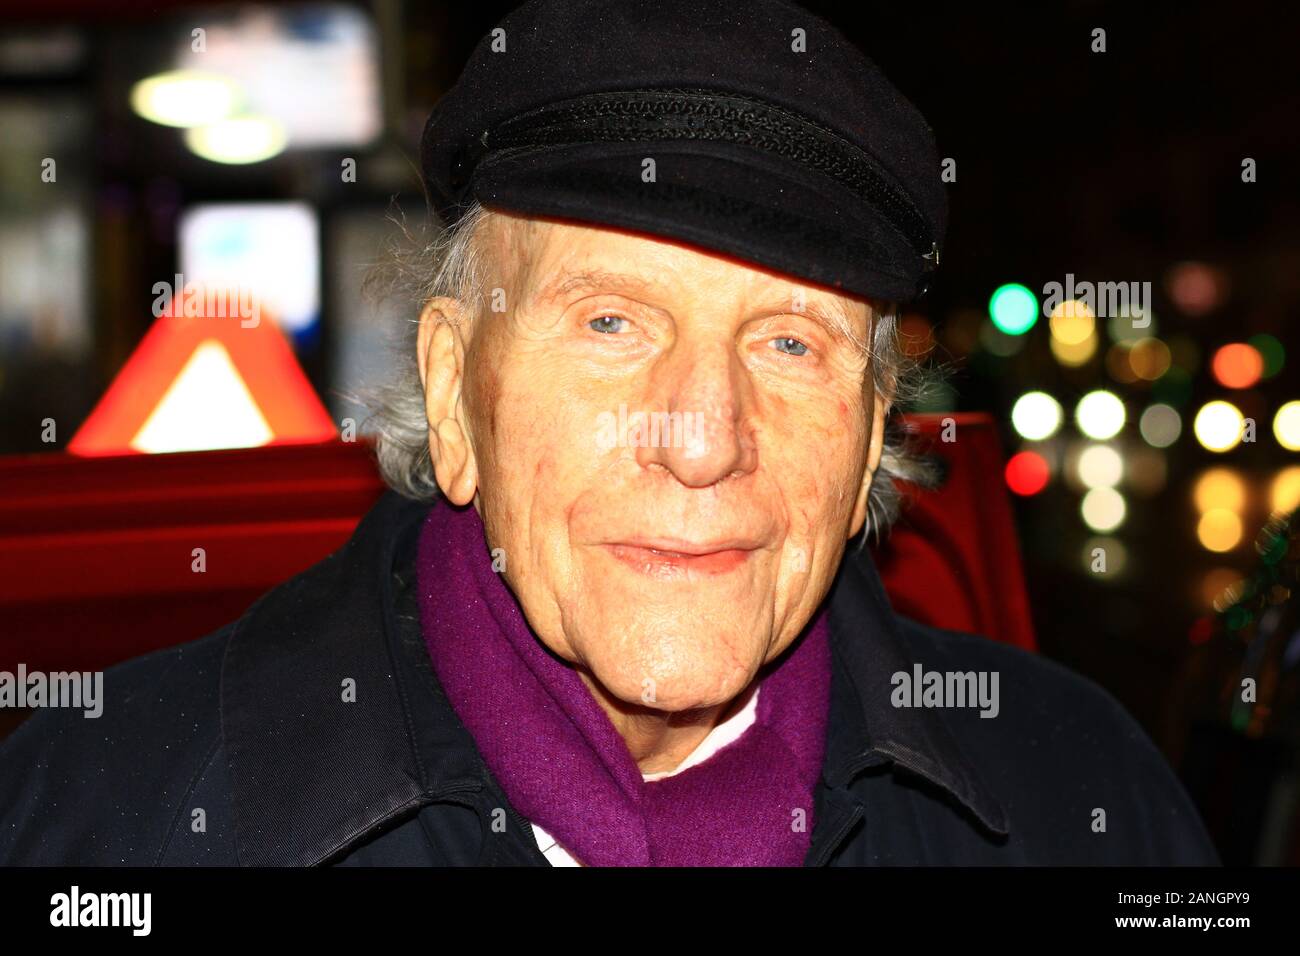 Lord Rowe-Beddoe pictured in Victoria Street, Westminster on 14th January 2020. Baron Rowe-Beddoe is a crossbench Member of the House of Lords. Wales. Welsh business. The Welsh economy. Former chairman of the Welsh development agency. Welsh businessman. Stock Photo